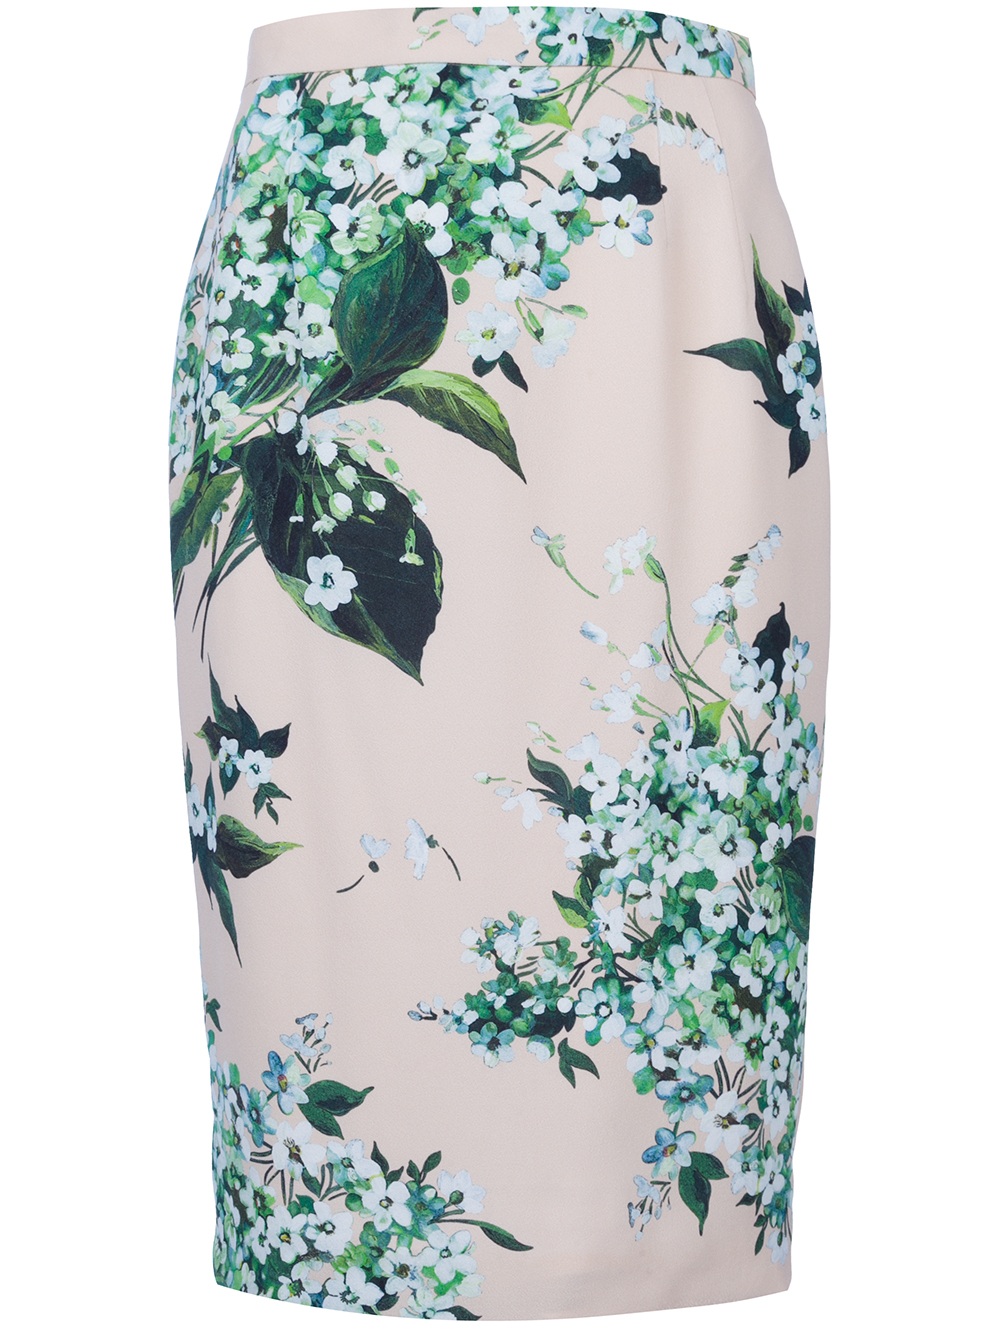 Dolce & Gabbana Floral Print Pencil Skirt in Floral | Lyst